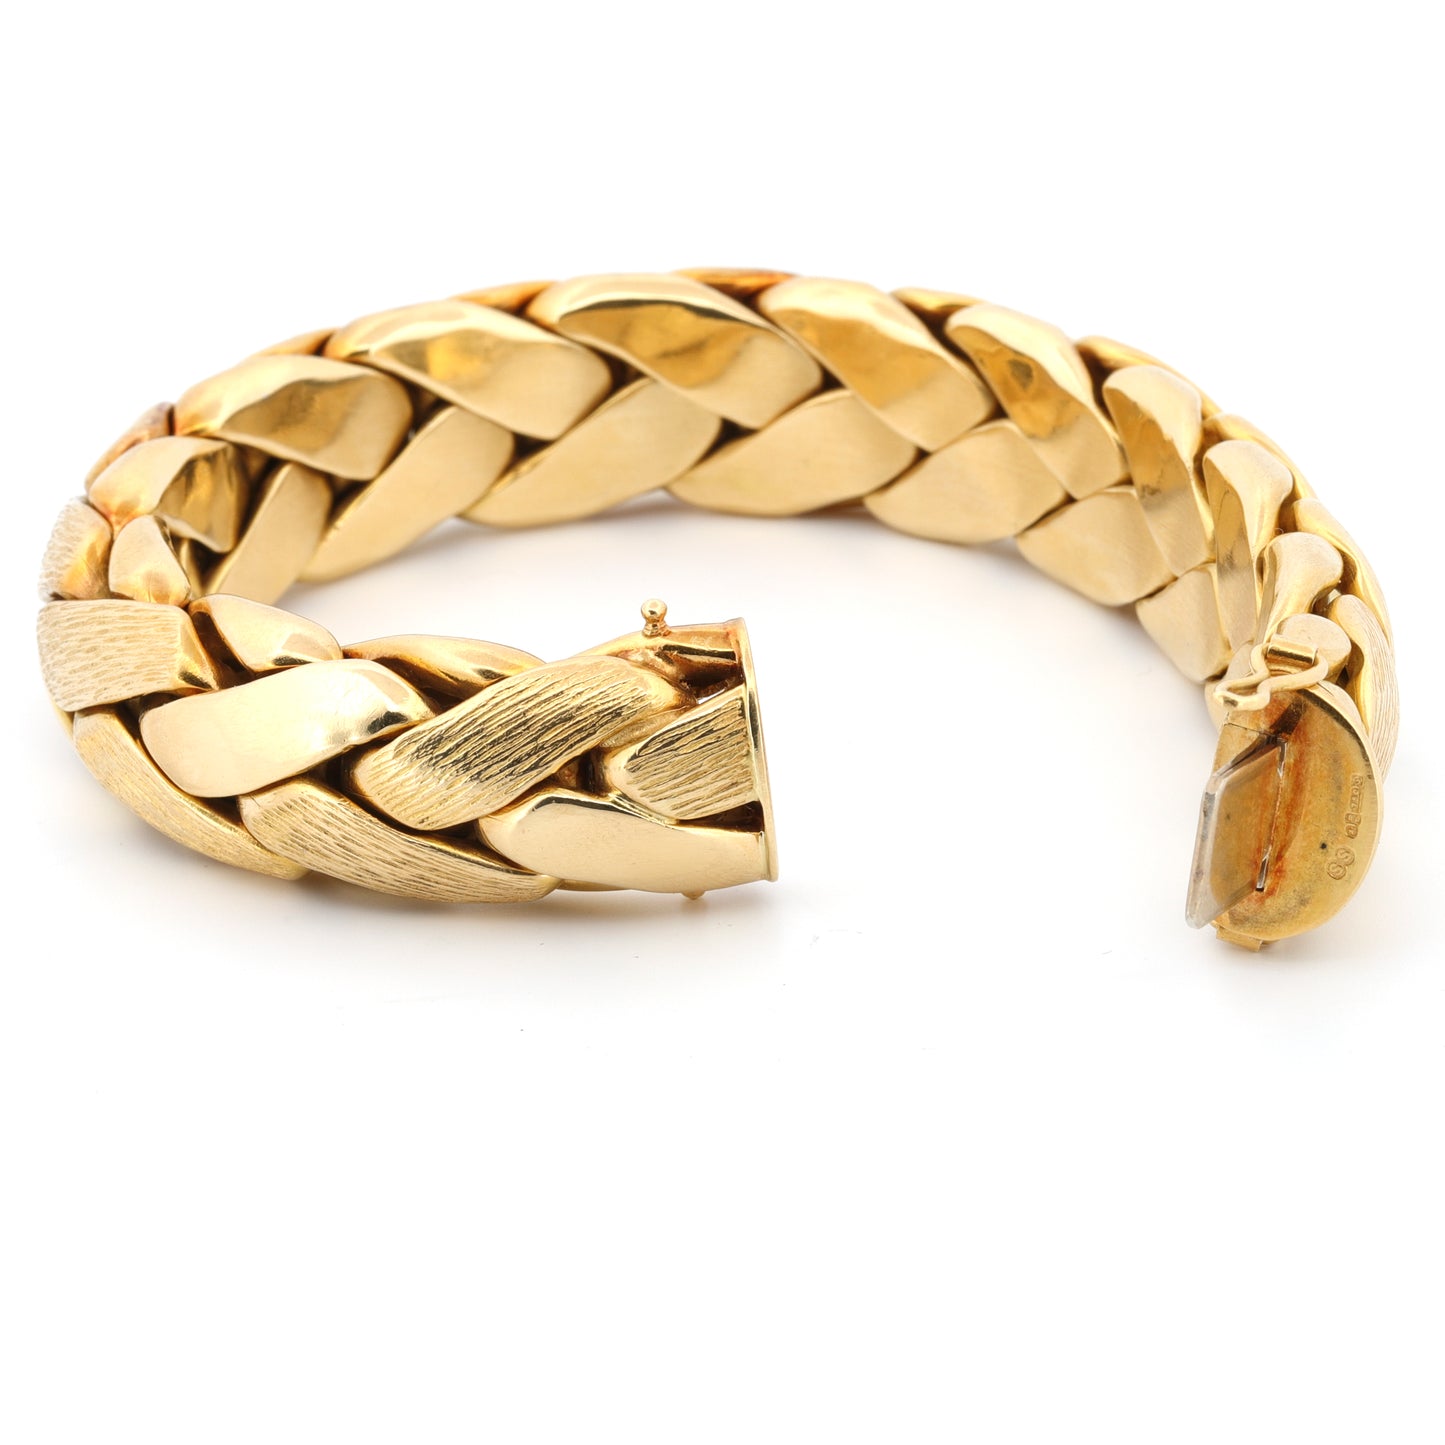 Retro Heavy 18k Yellow Gold Textured Braided Chain Bracelet Signed SS